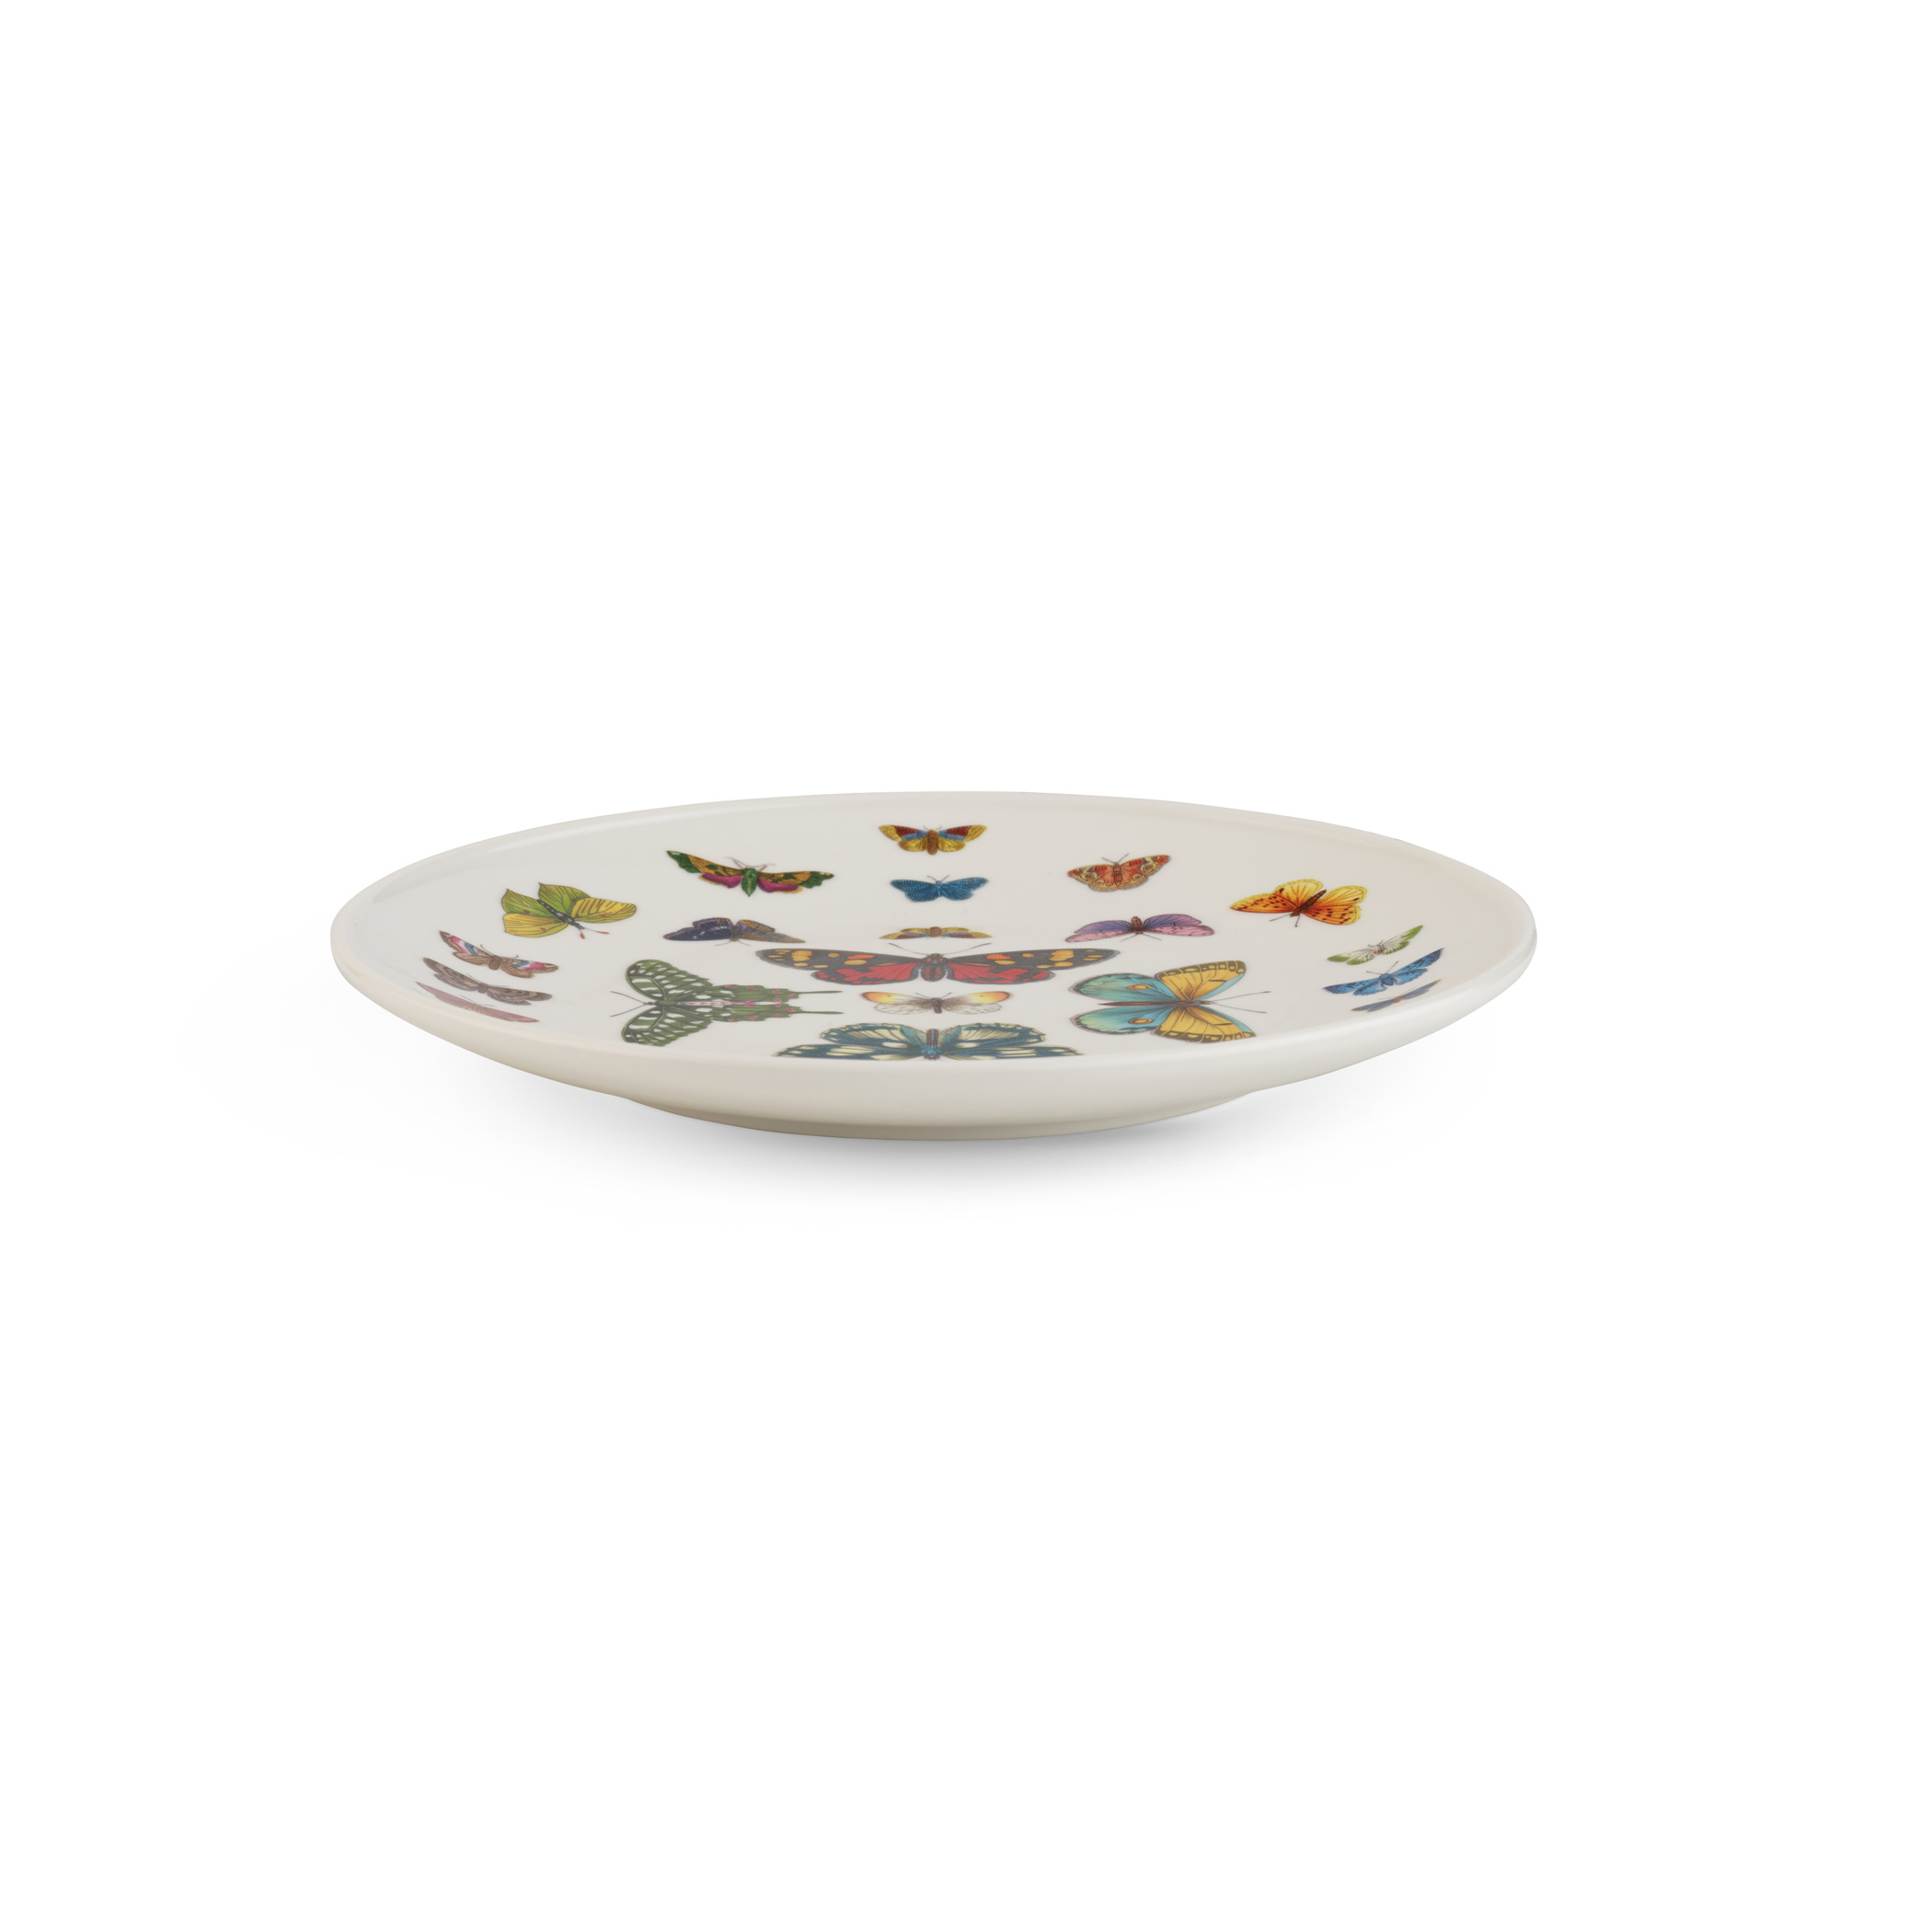 Botanic Garden Harmony Accents White 8.5 Inch Coupe Plate image number null